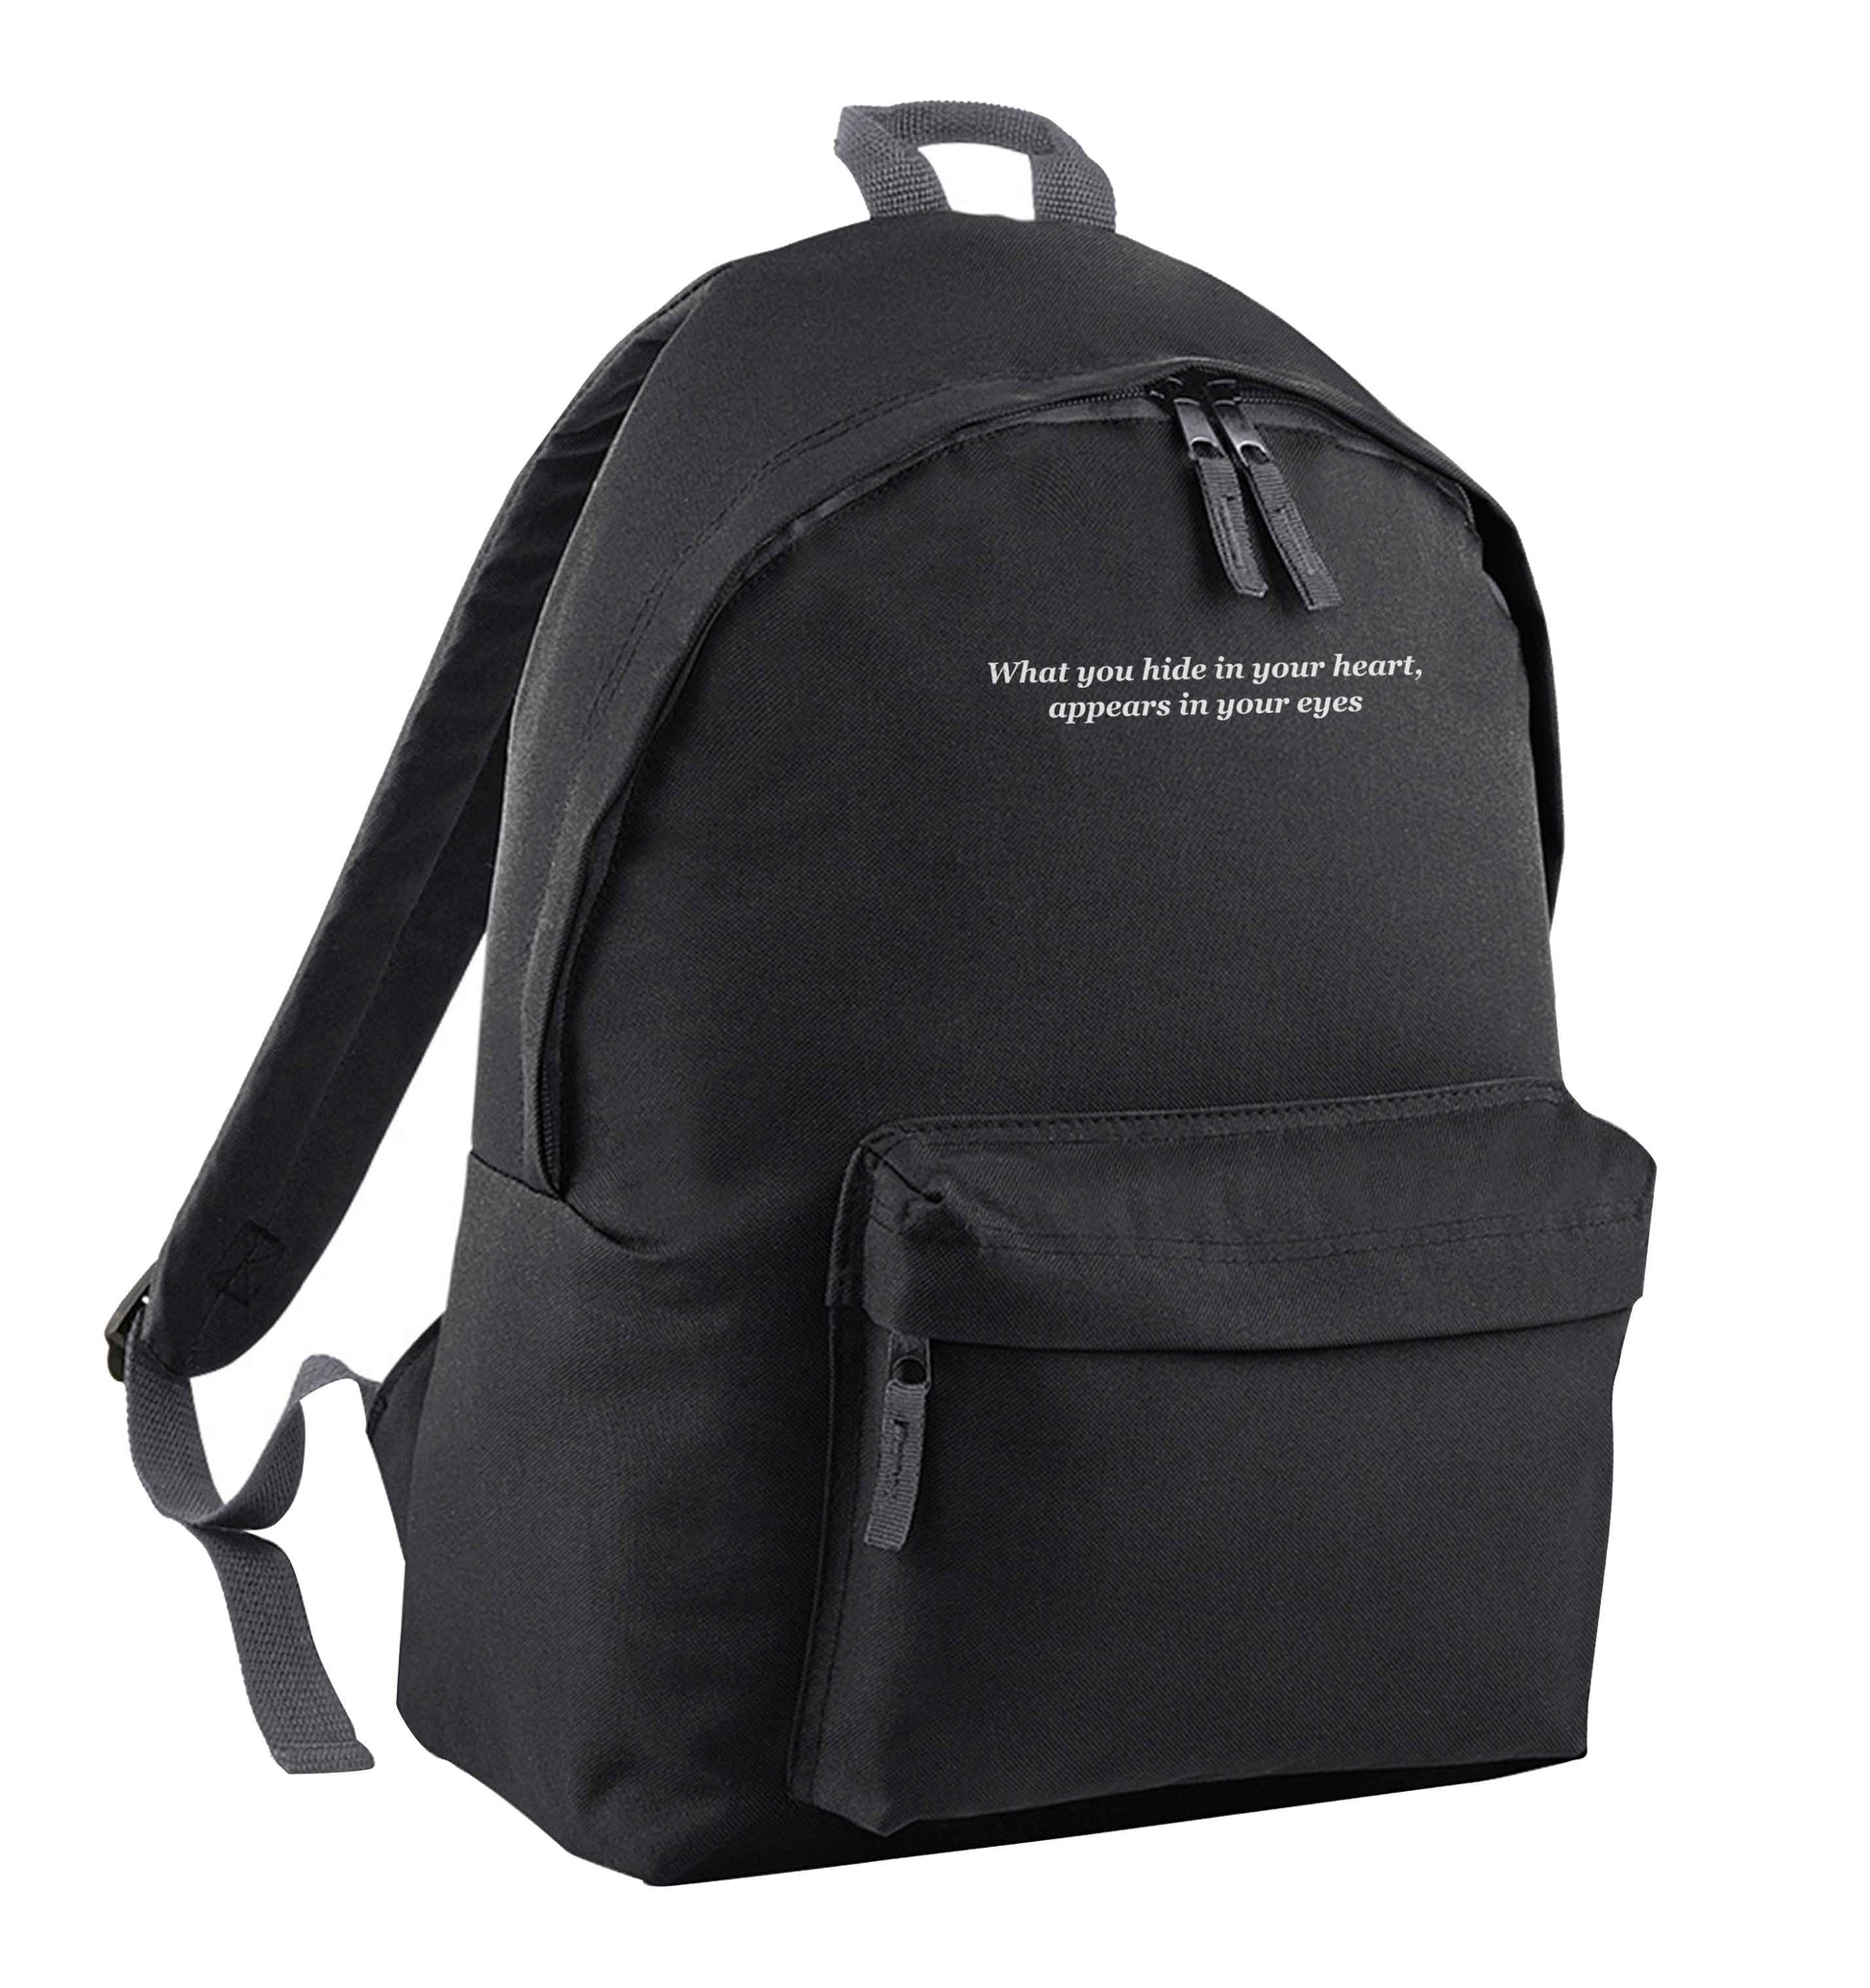 What you hide in your heart, appears in your eyes black adults backpack